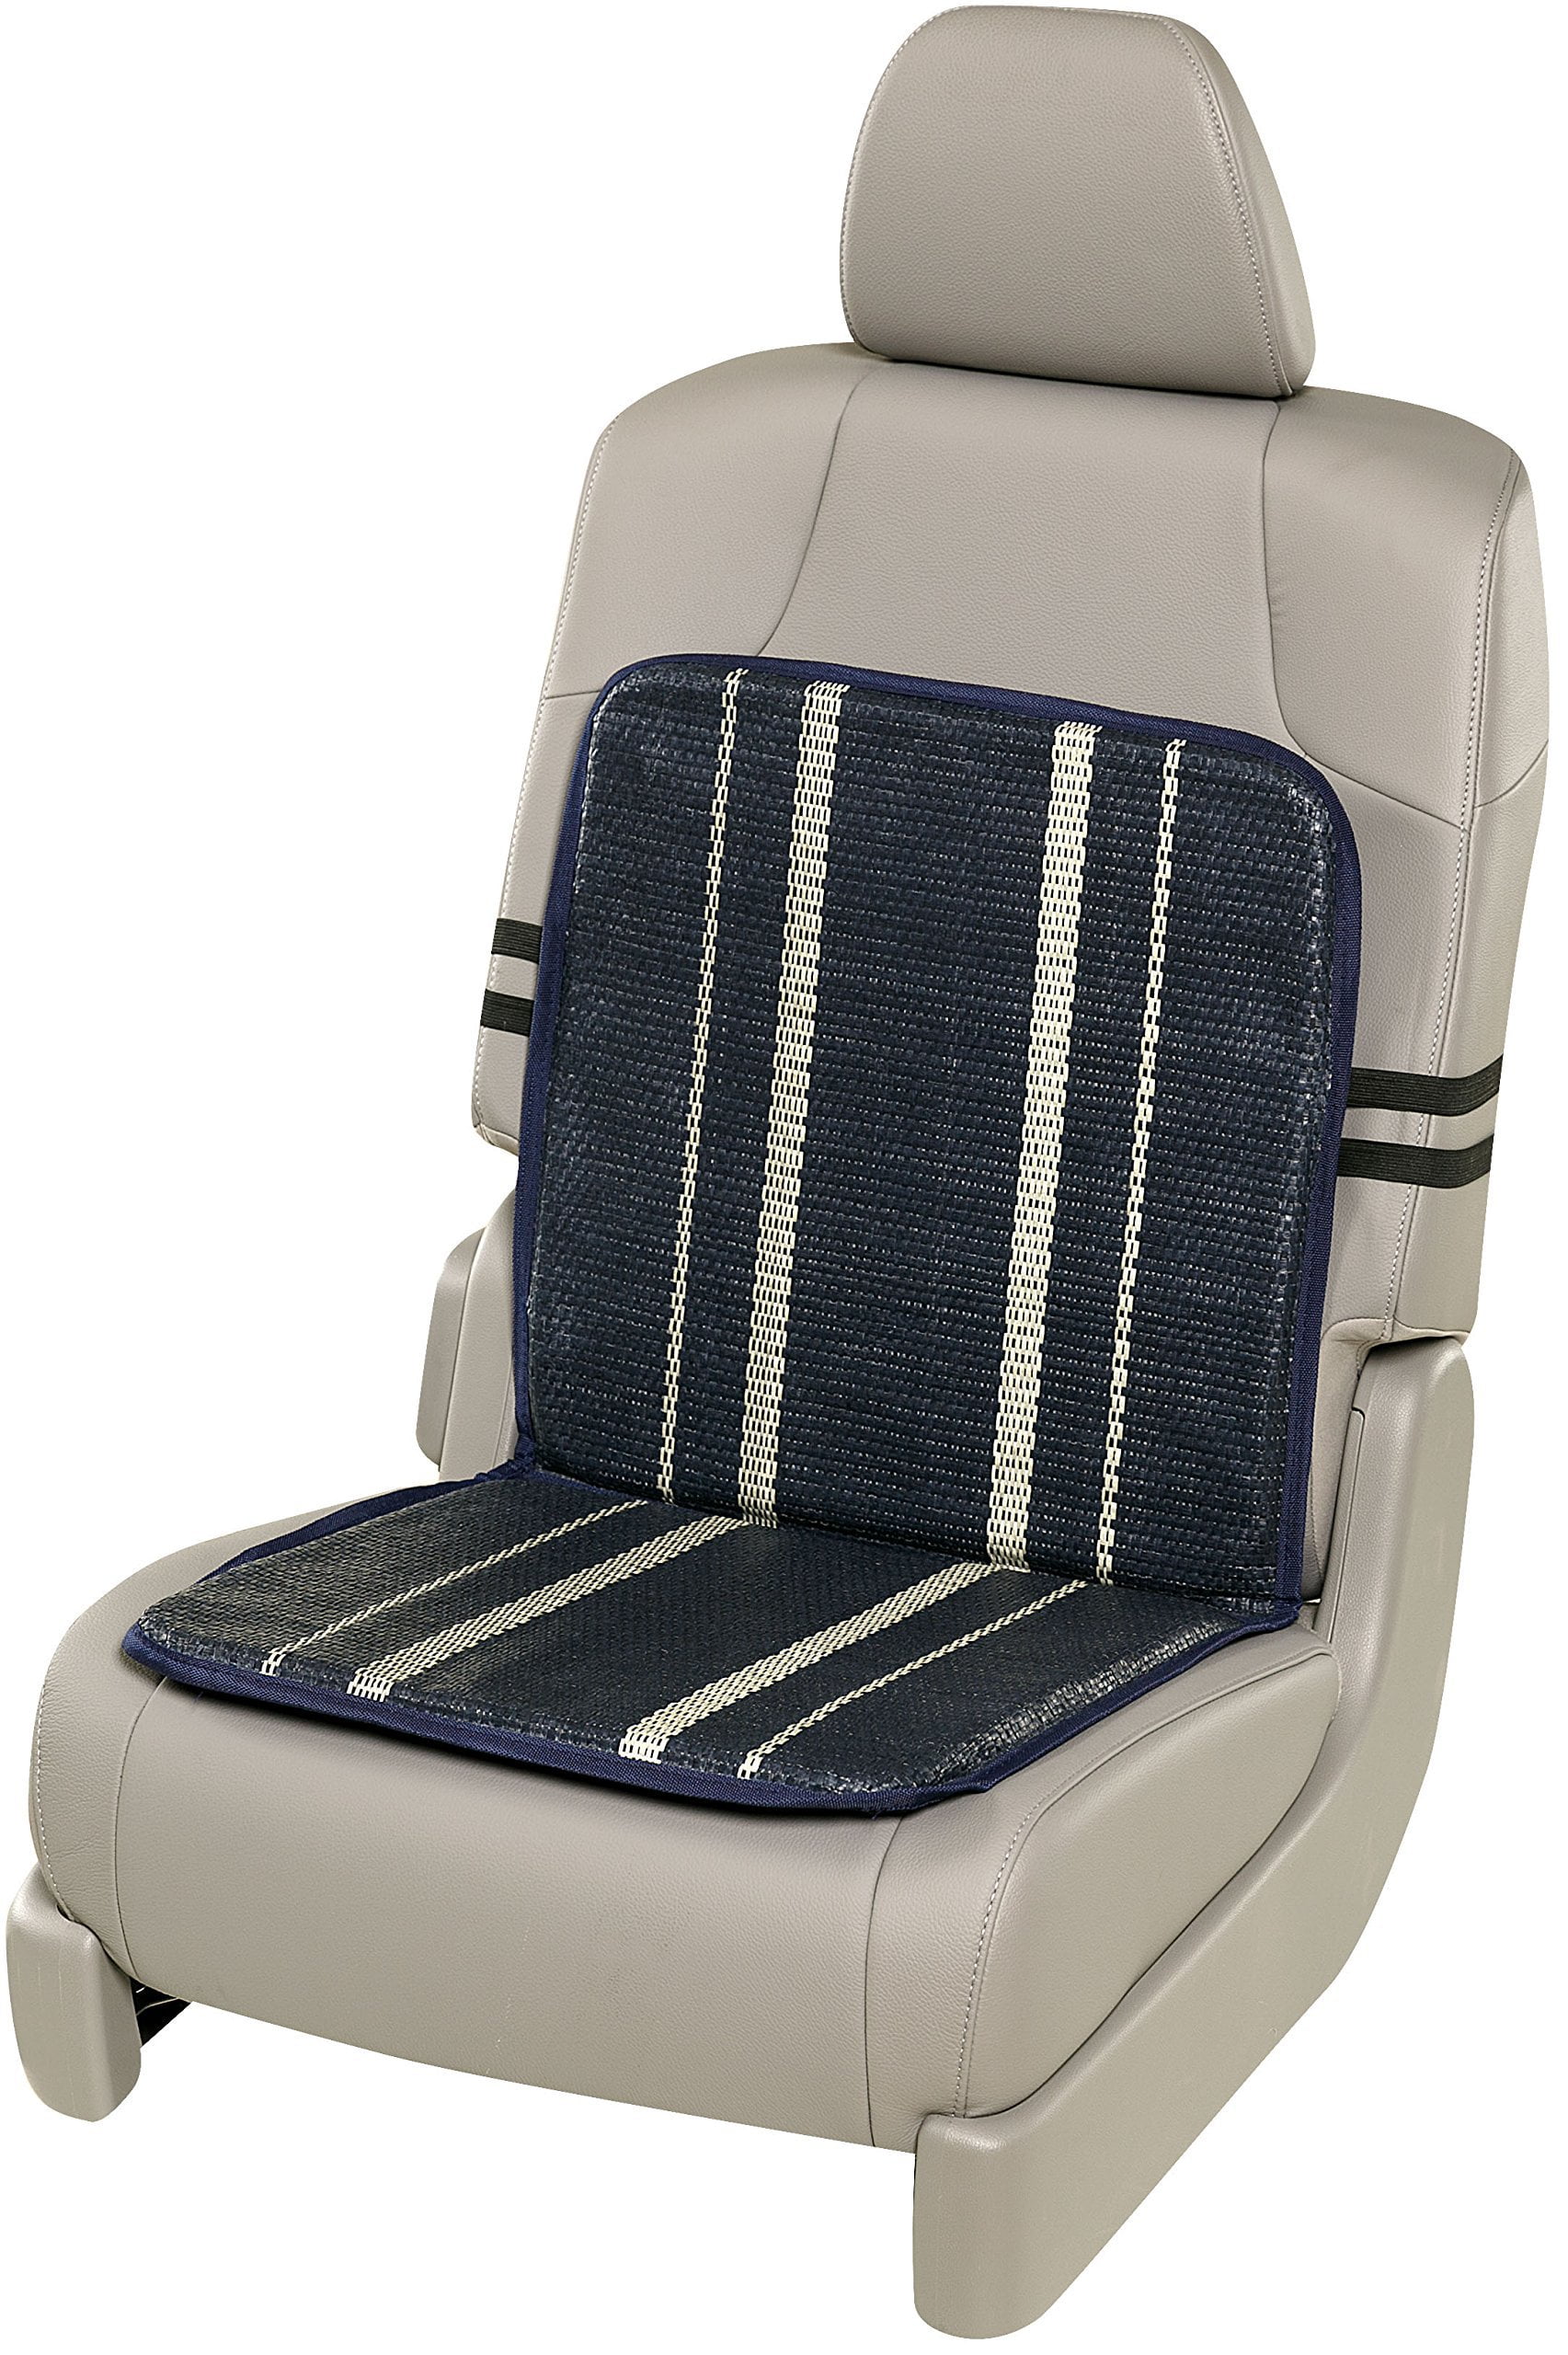 Cooling Seat Cushion with Kool Max® Packs